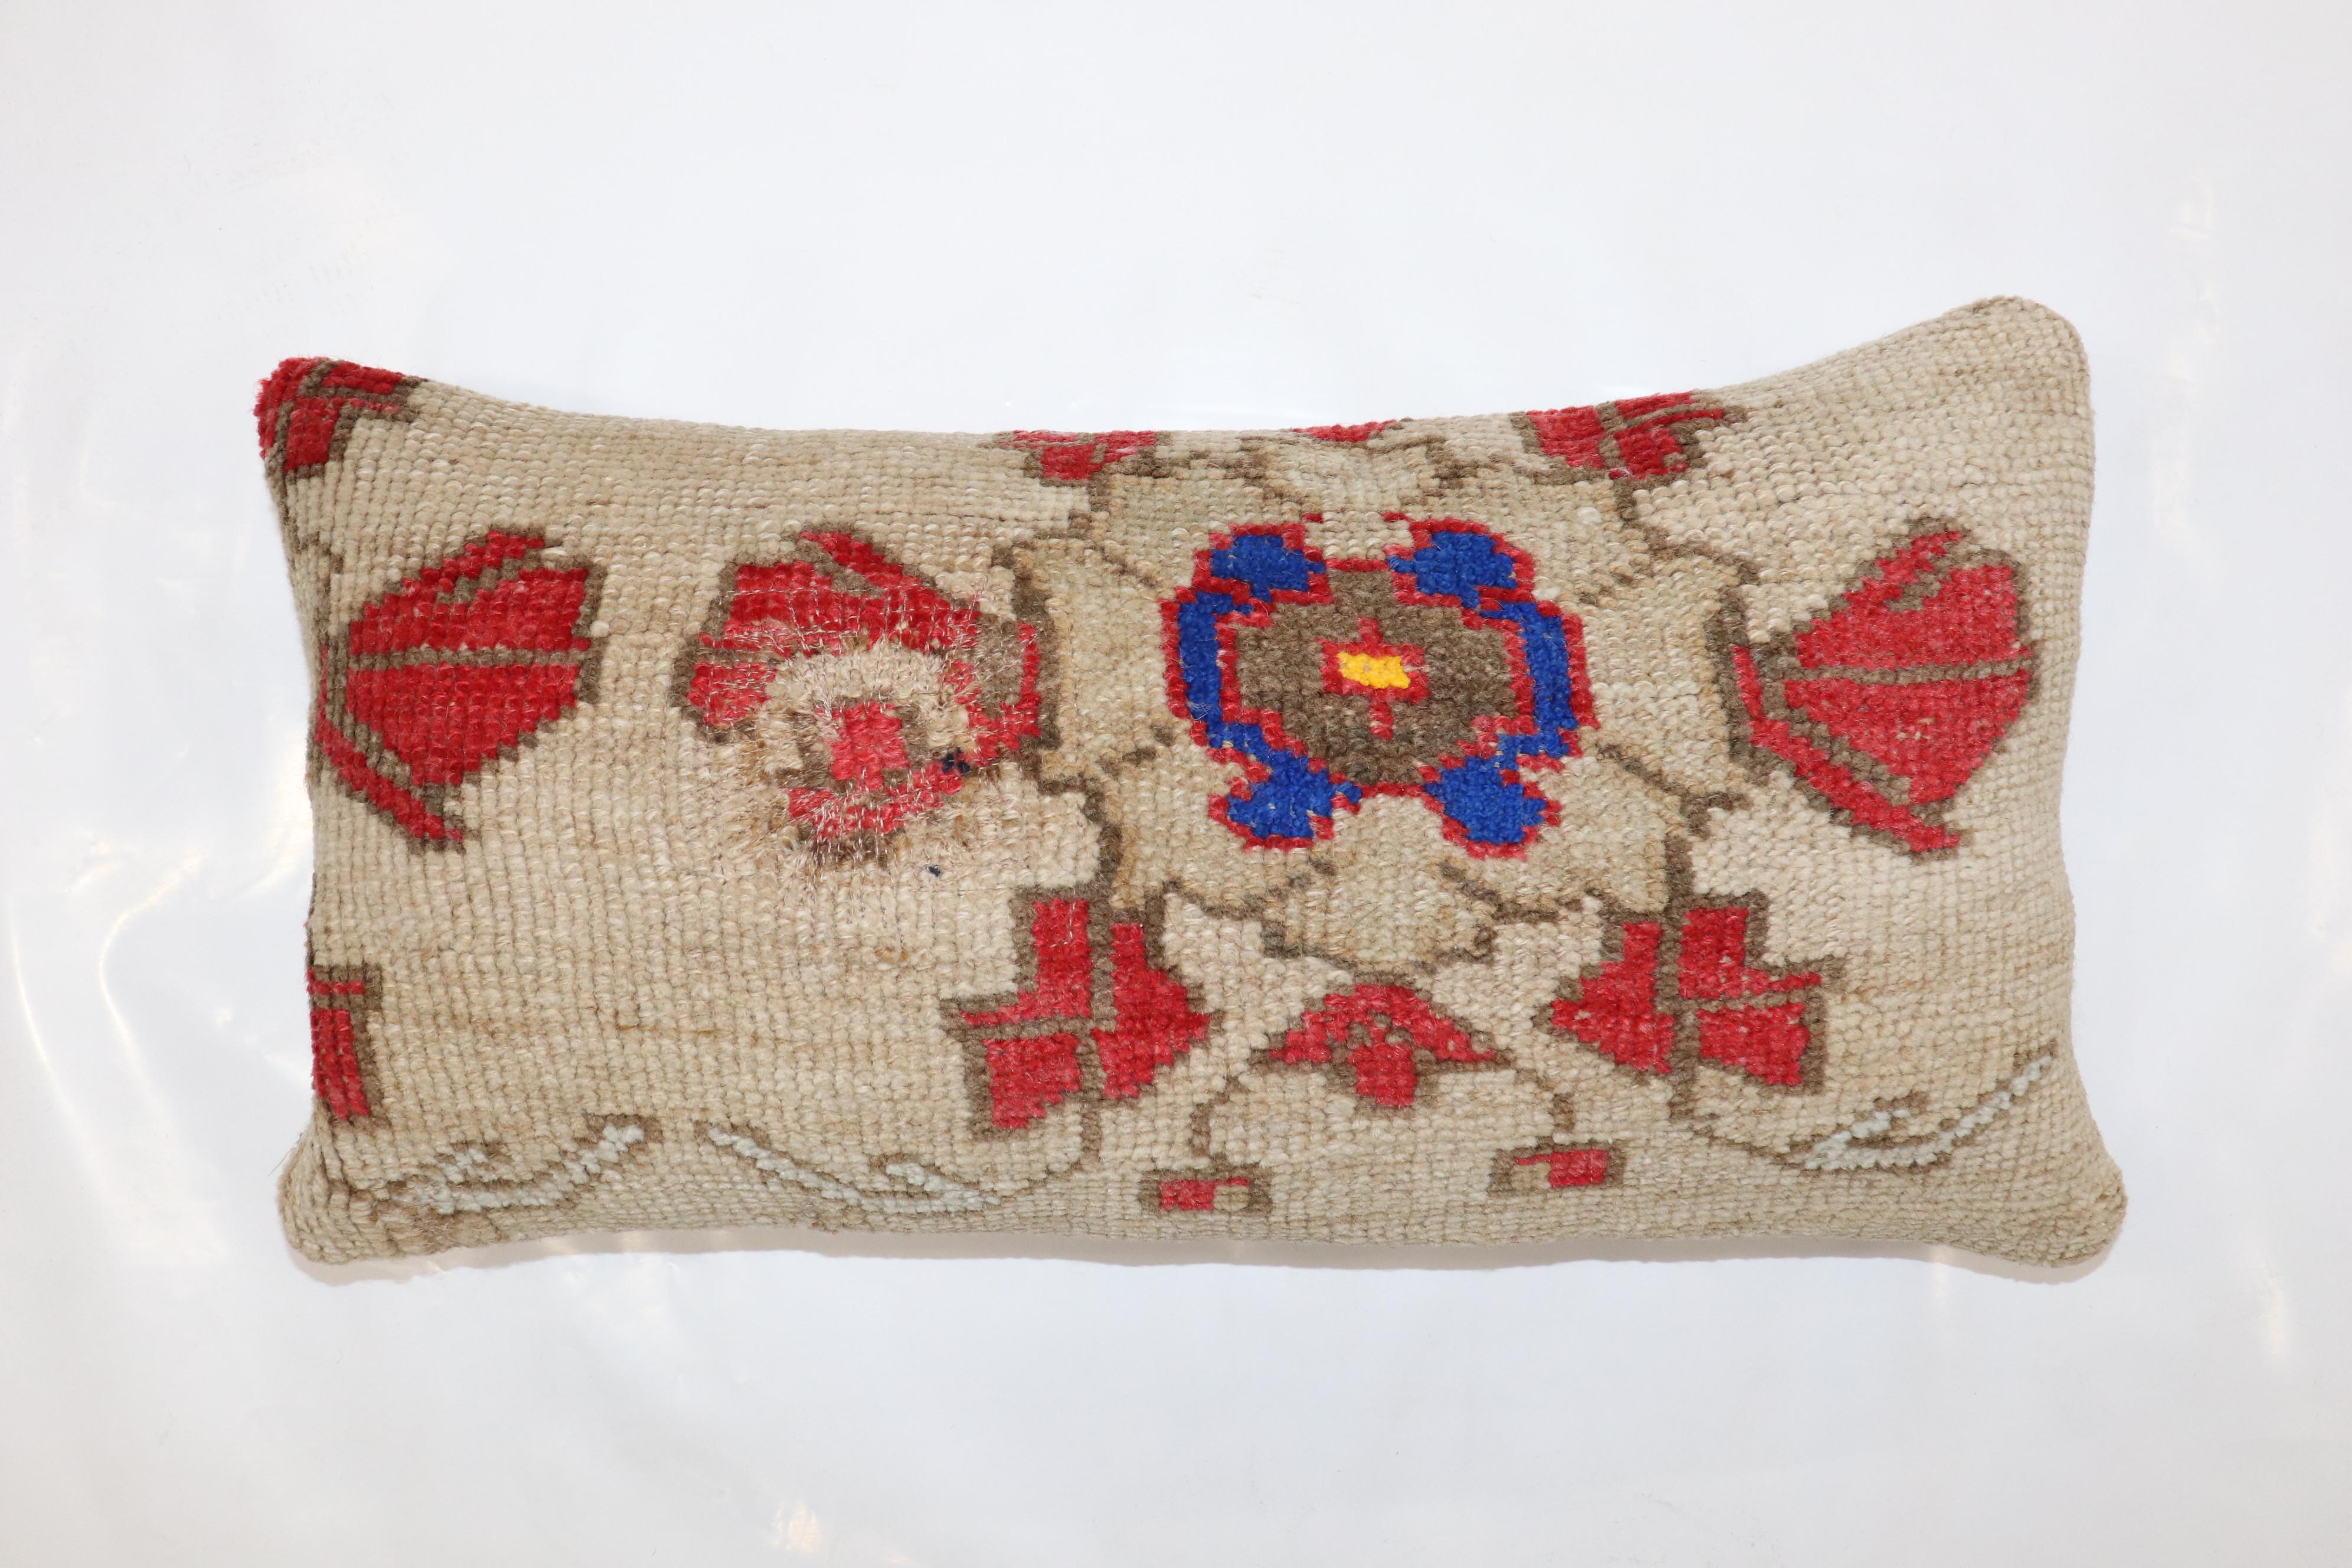 Large Pillow made from a vintage Turkish Kars Rug

Measures: 12'' x 22''.